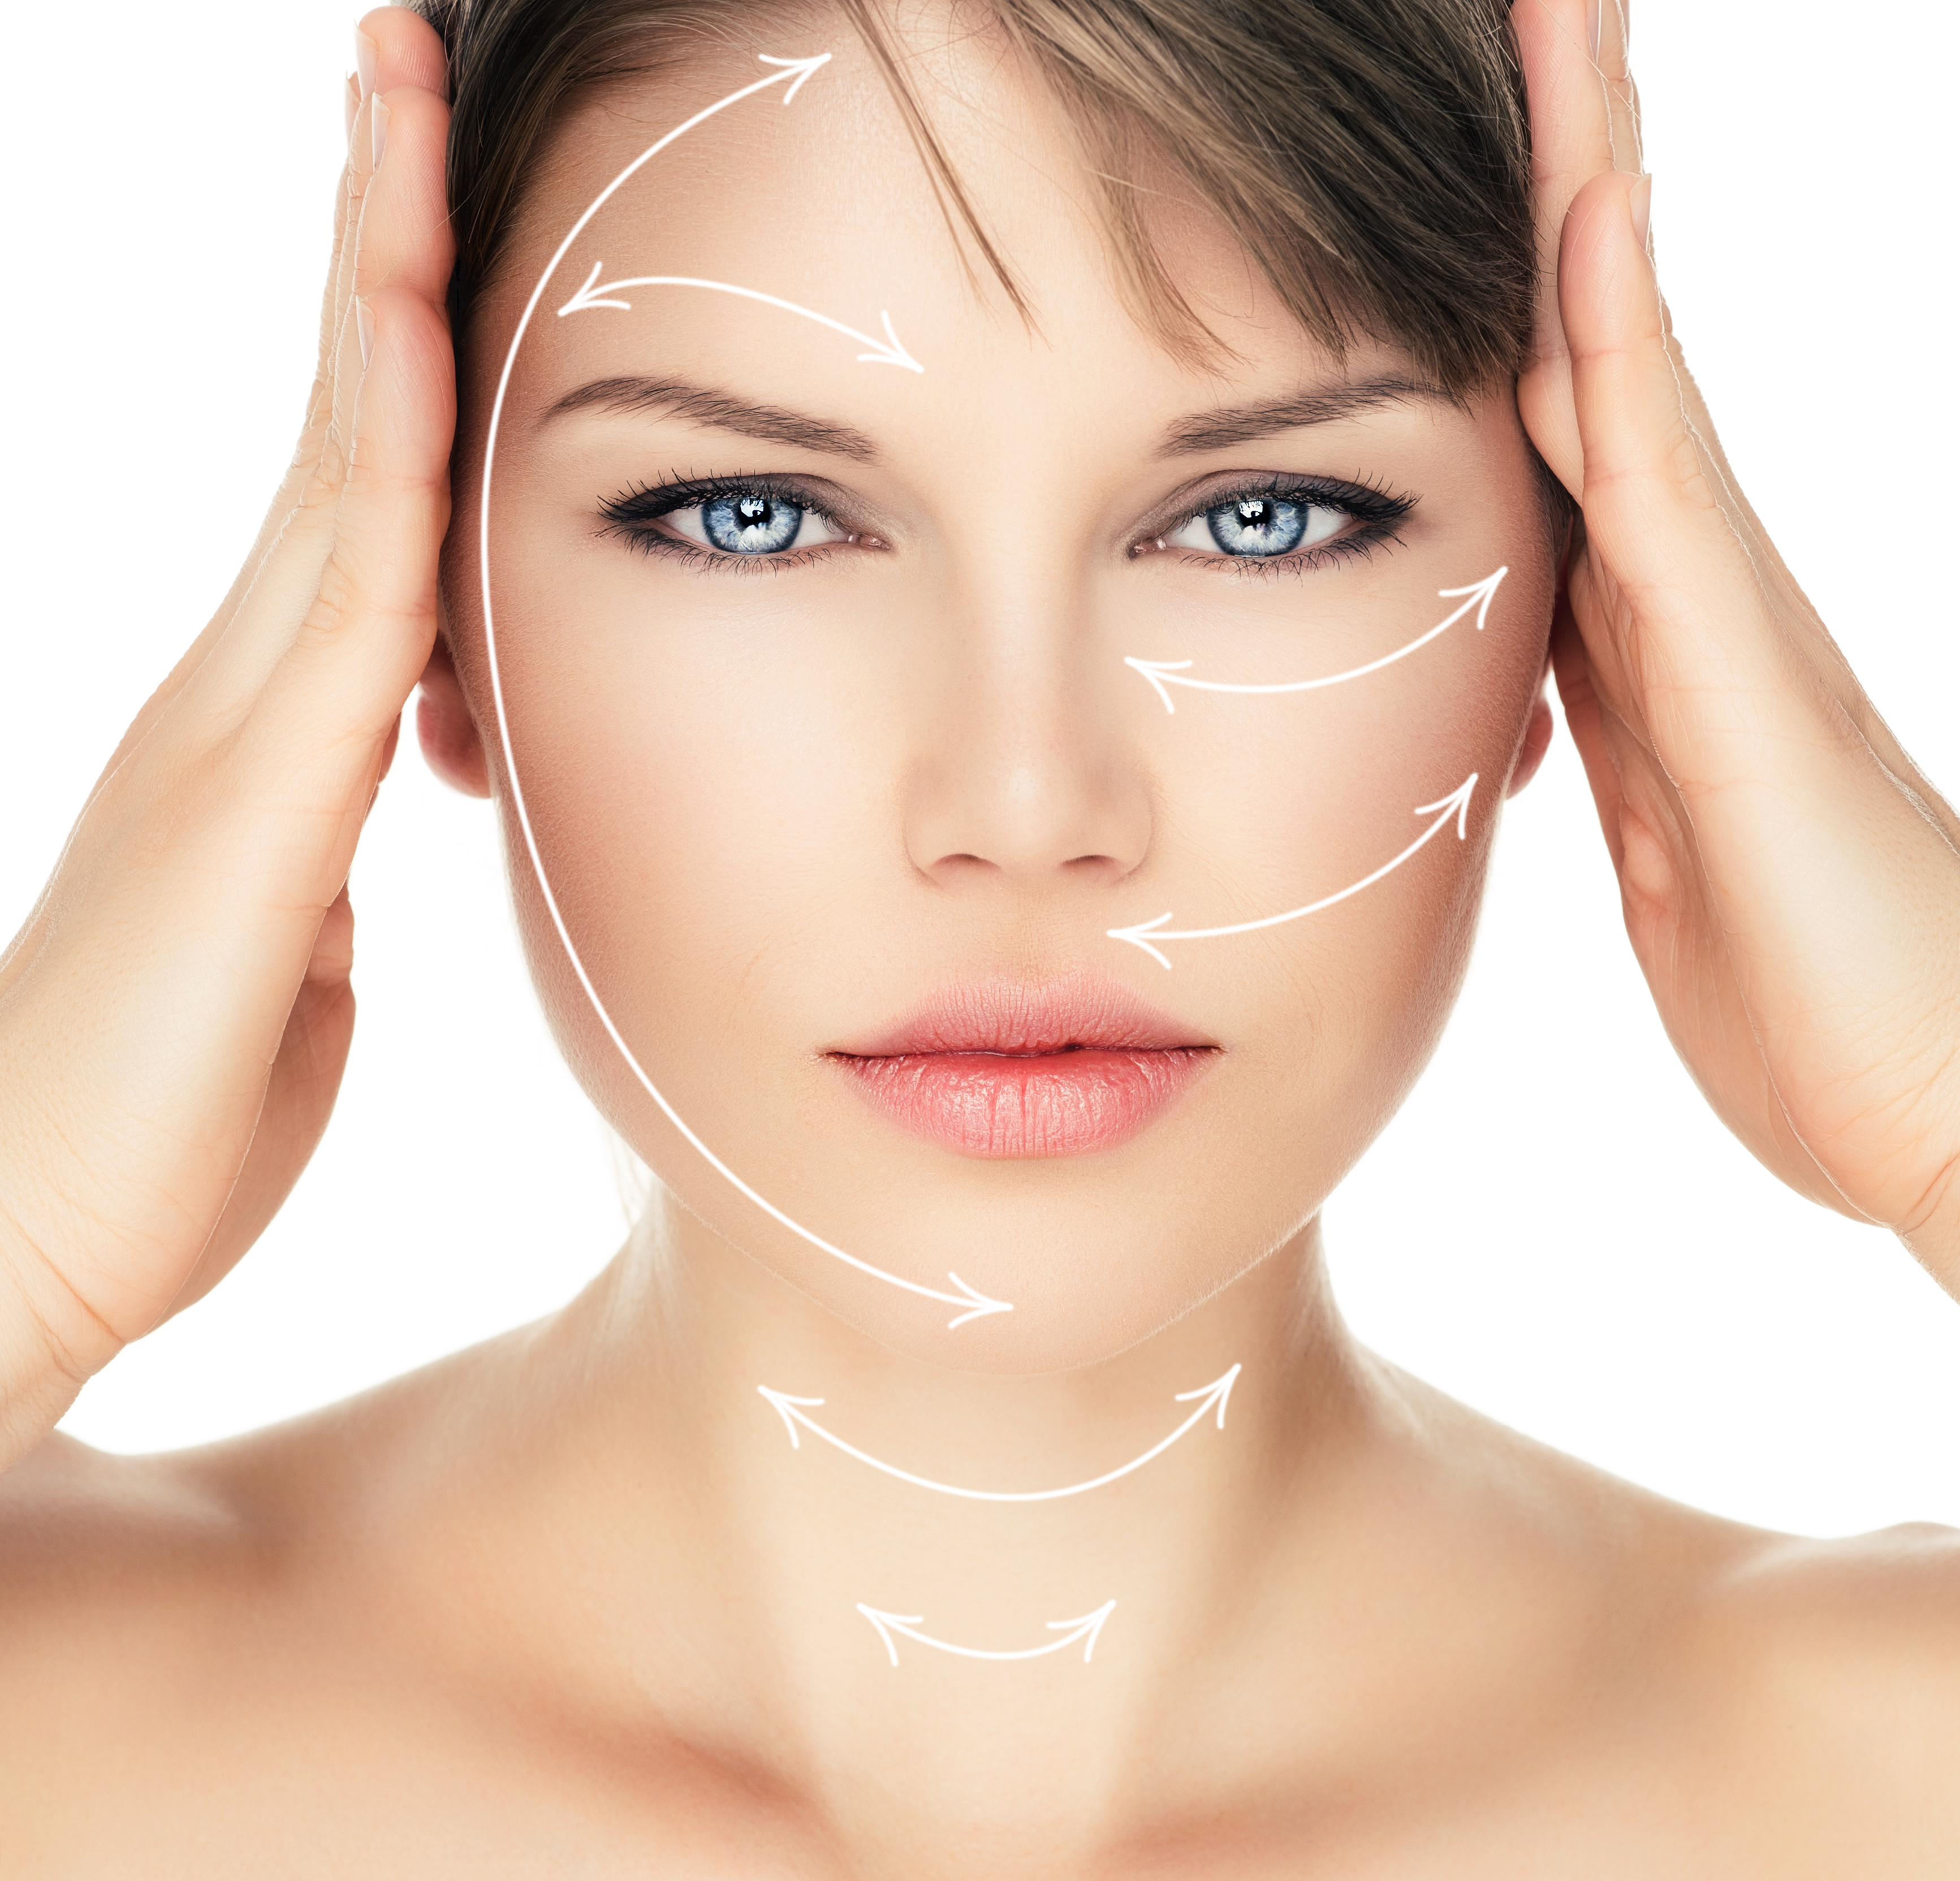 Facelift Surgery in Iran